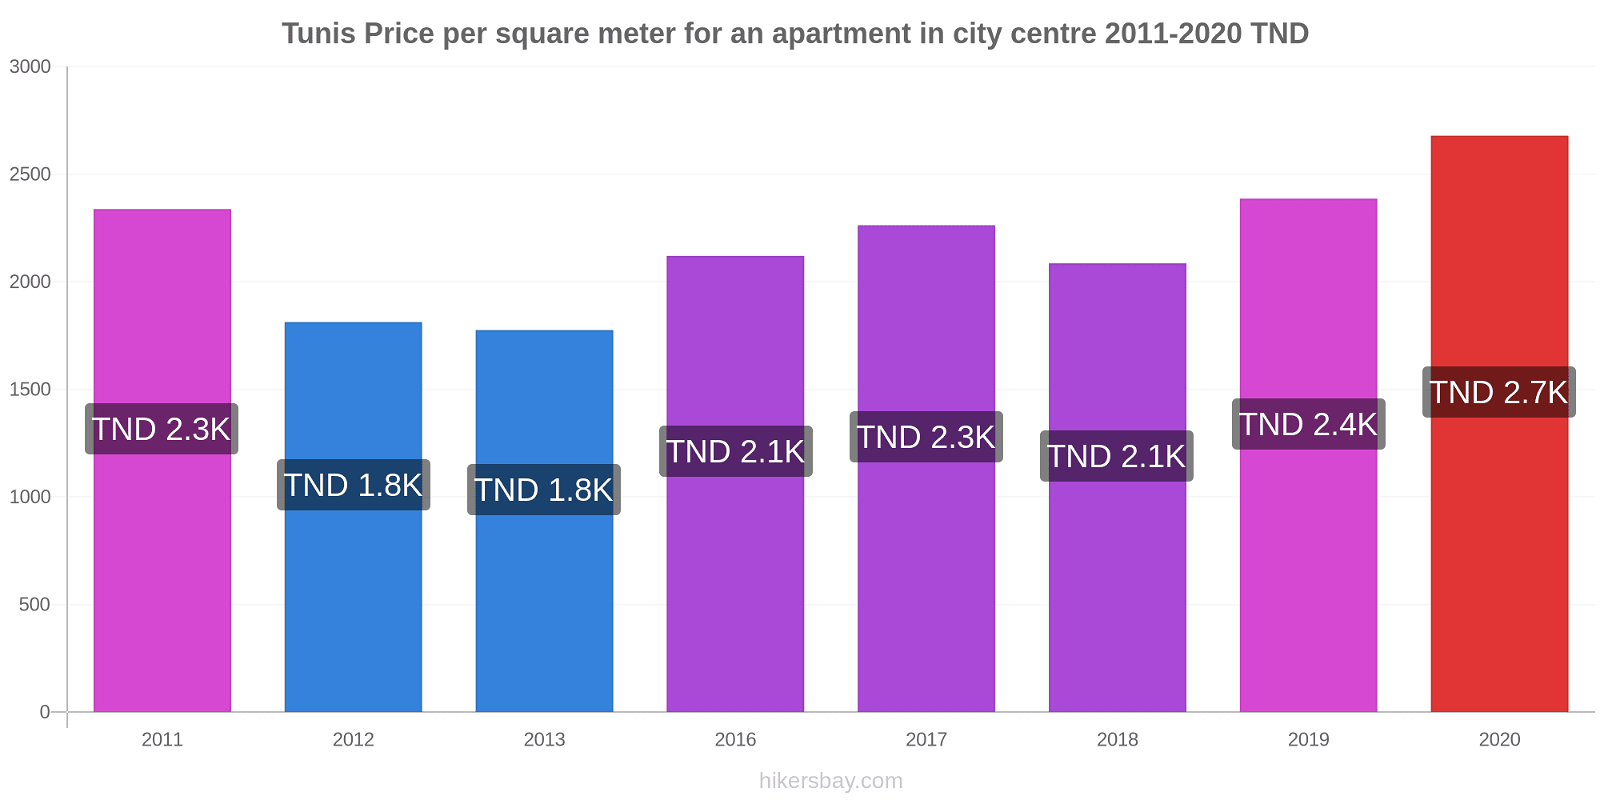 Tunis price changes Price per square meter for an apartment in city centre hikersbay.com